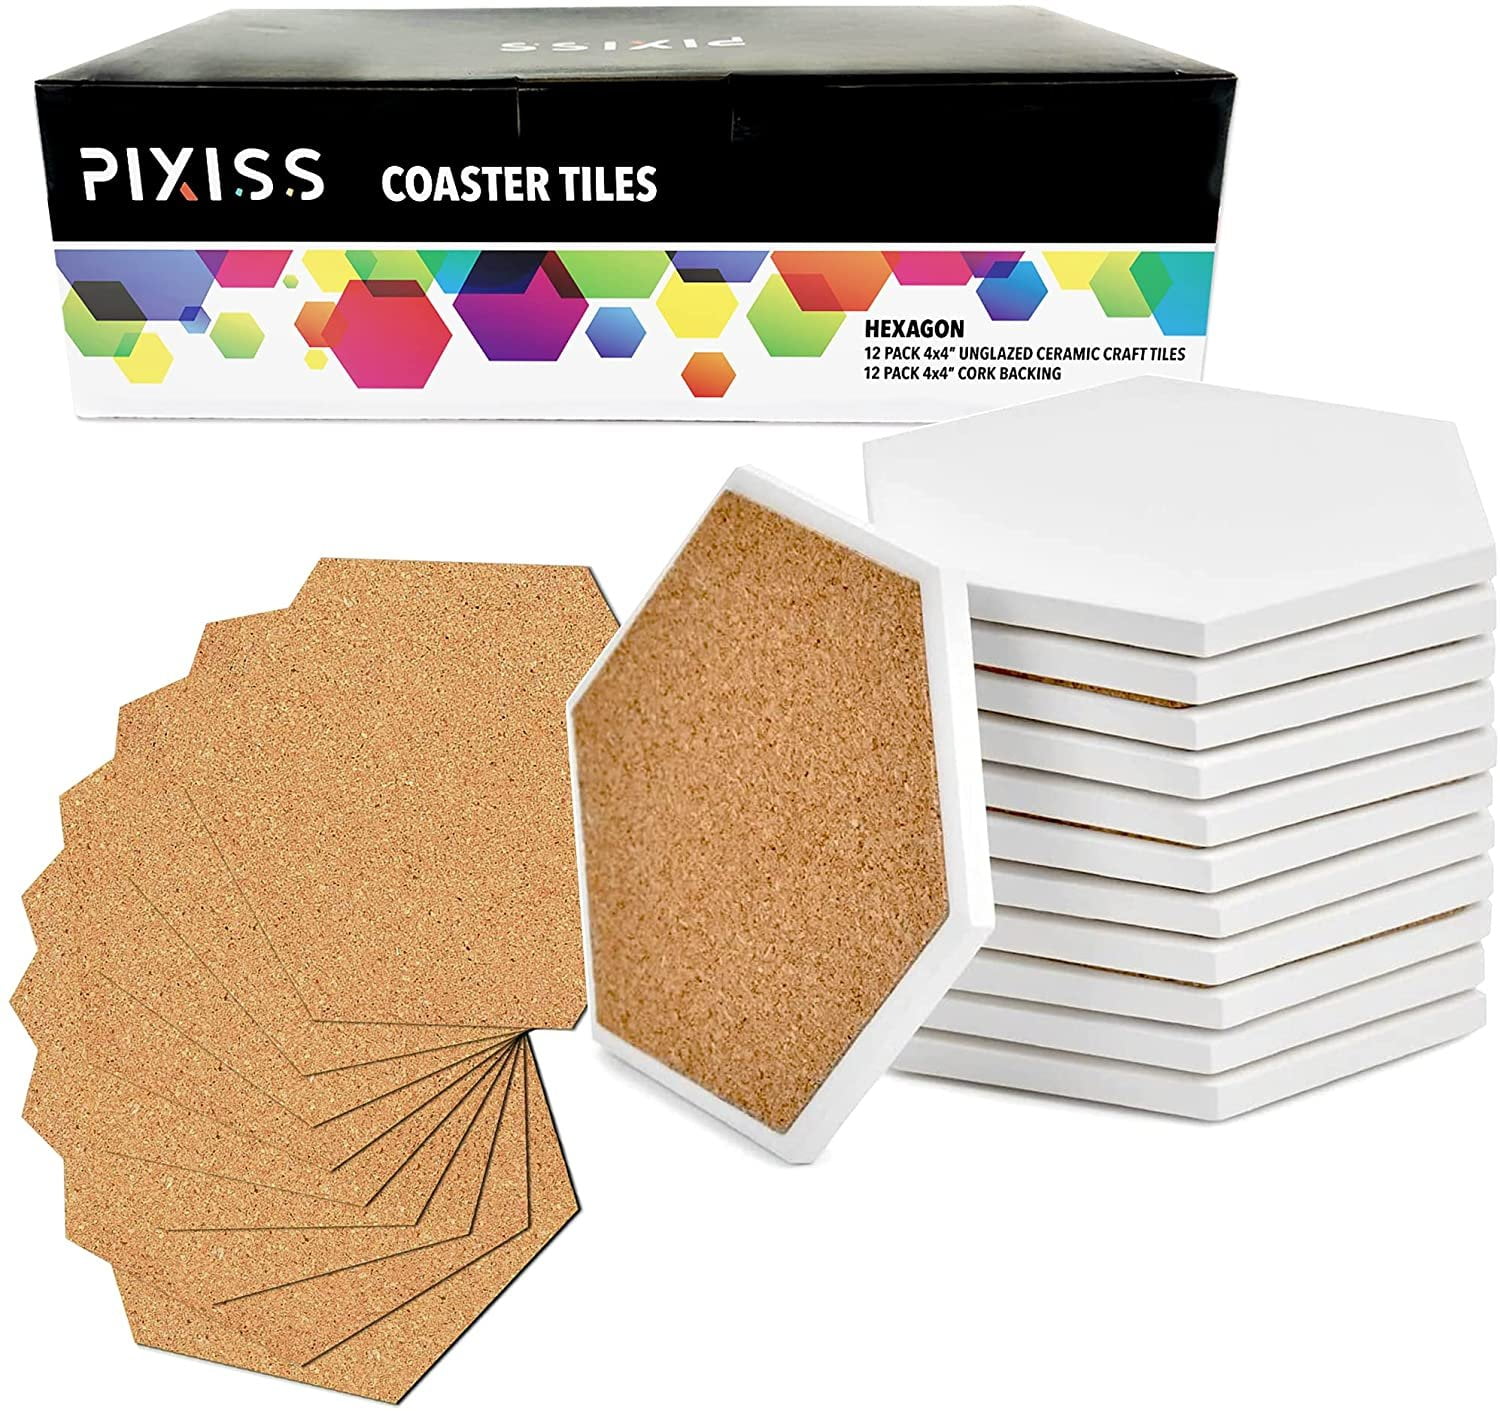 100 Pack Ceramic Tiles for Crafts Coasters, Ceramic White Tiles Unglazed  4x4 with Cork Backing Pads, Use with Alcohol Ink or Acrylic Pouring, DIY  Make Your Own …